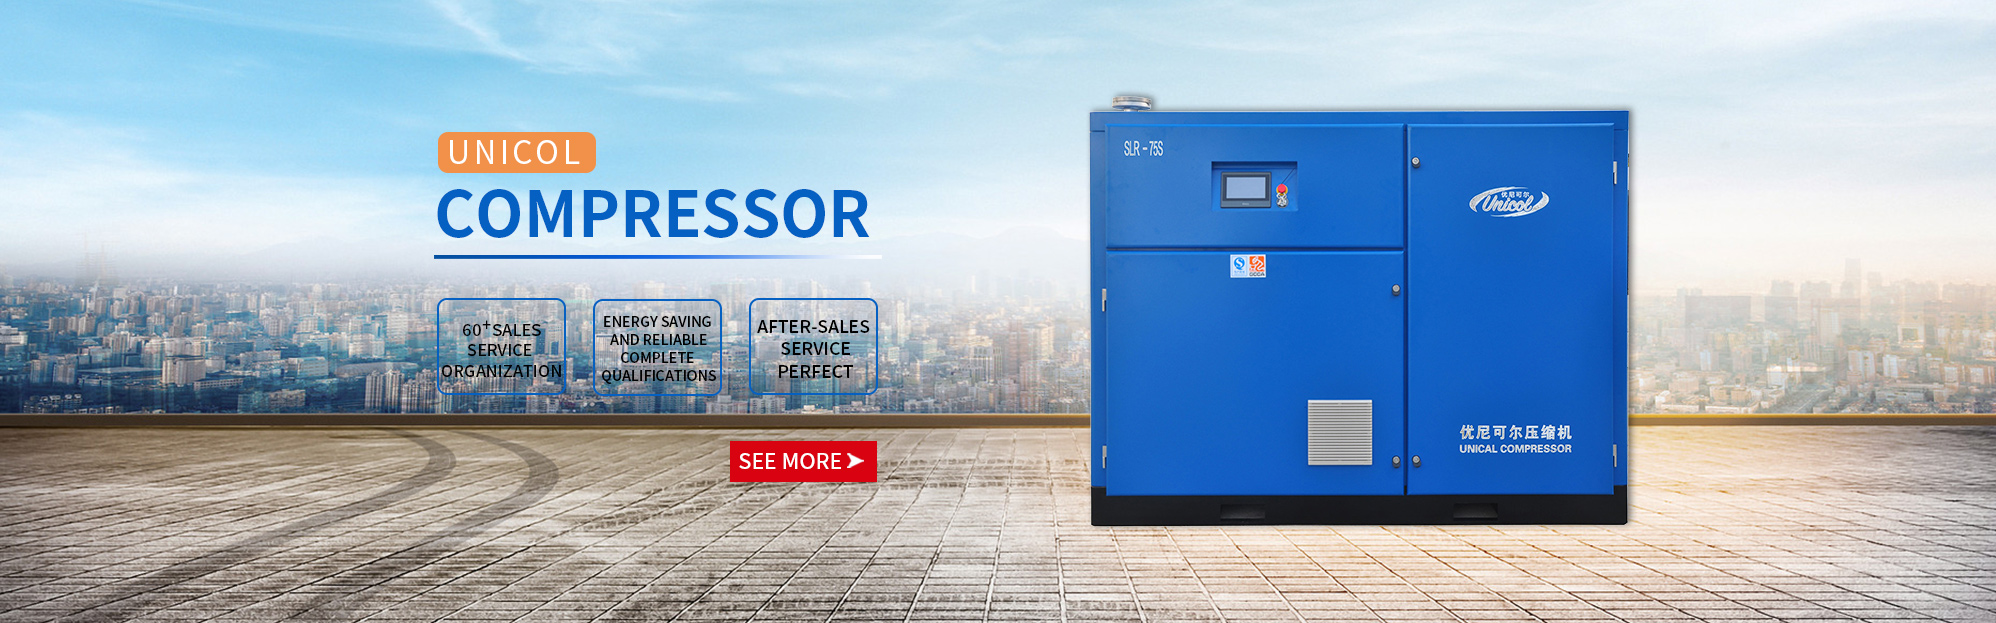 Two stage screw air compressor